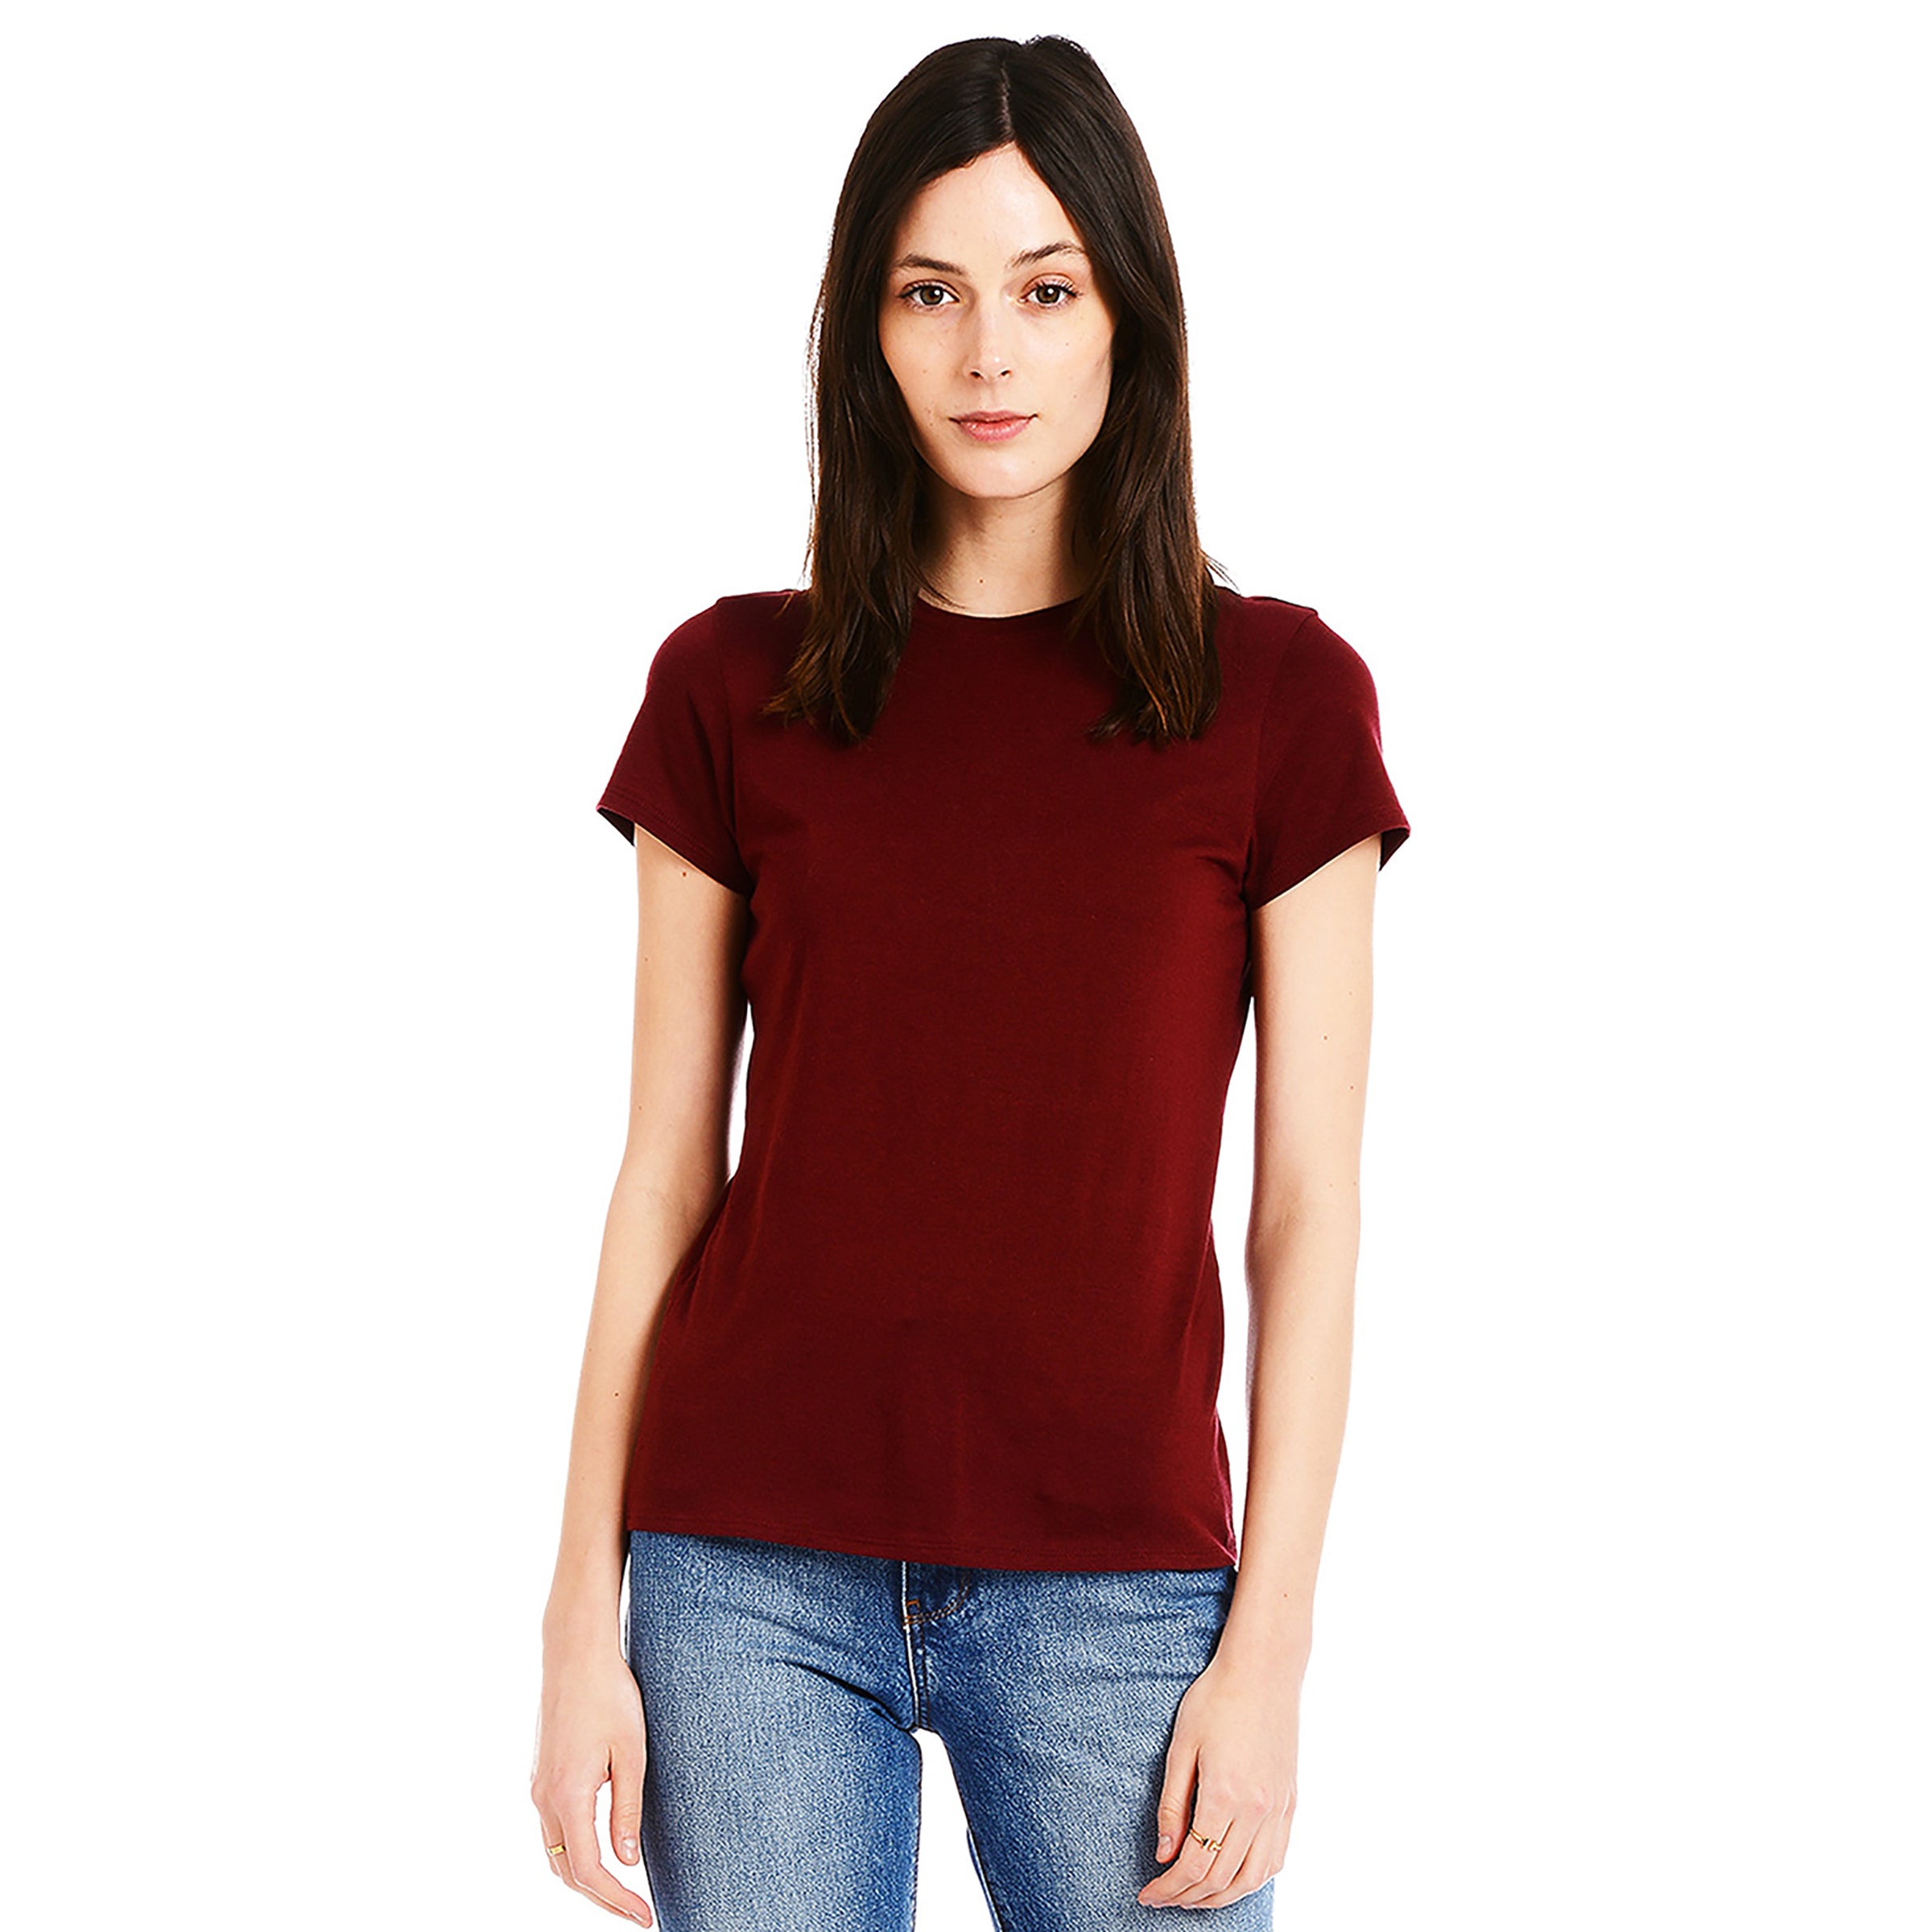 Women wearing Crimson Fitted Crew Marcy Tee